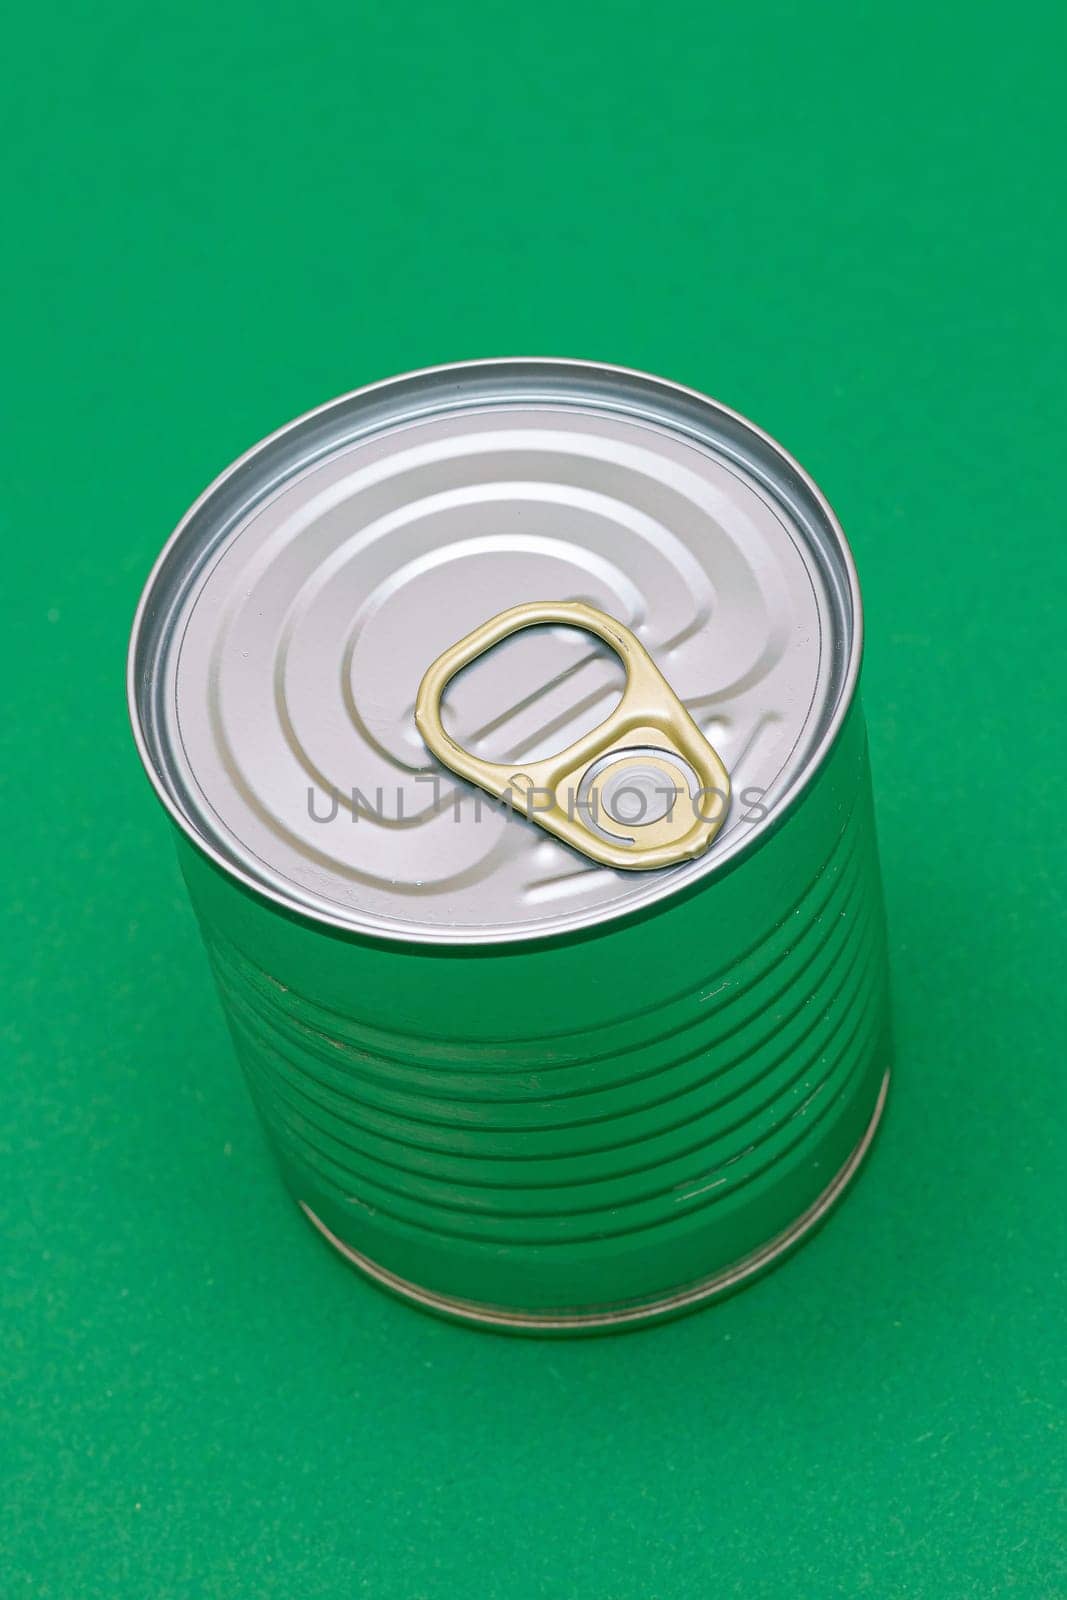 Unopened Tin Can with Blank Edge on Green Background by InfinitumProdux